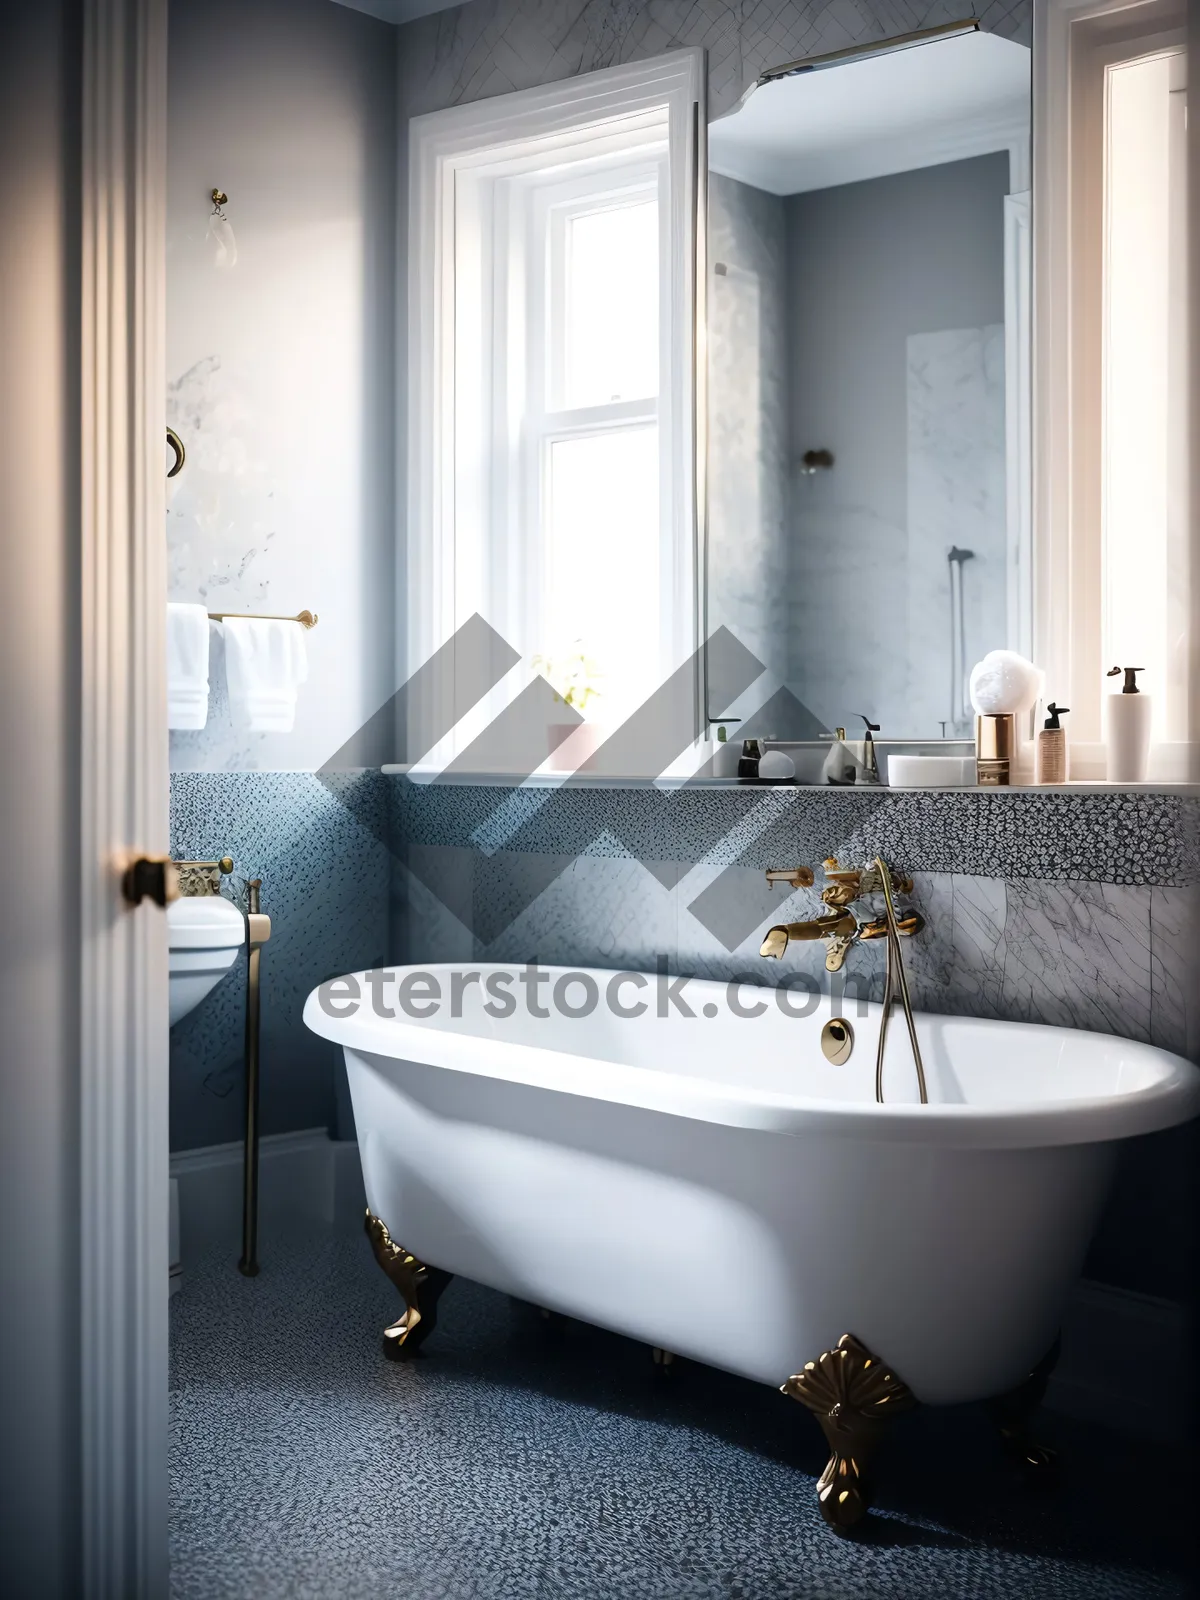 Picture of Modern Luxury Bathroom with Stylish Interior Design